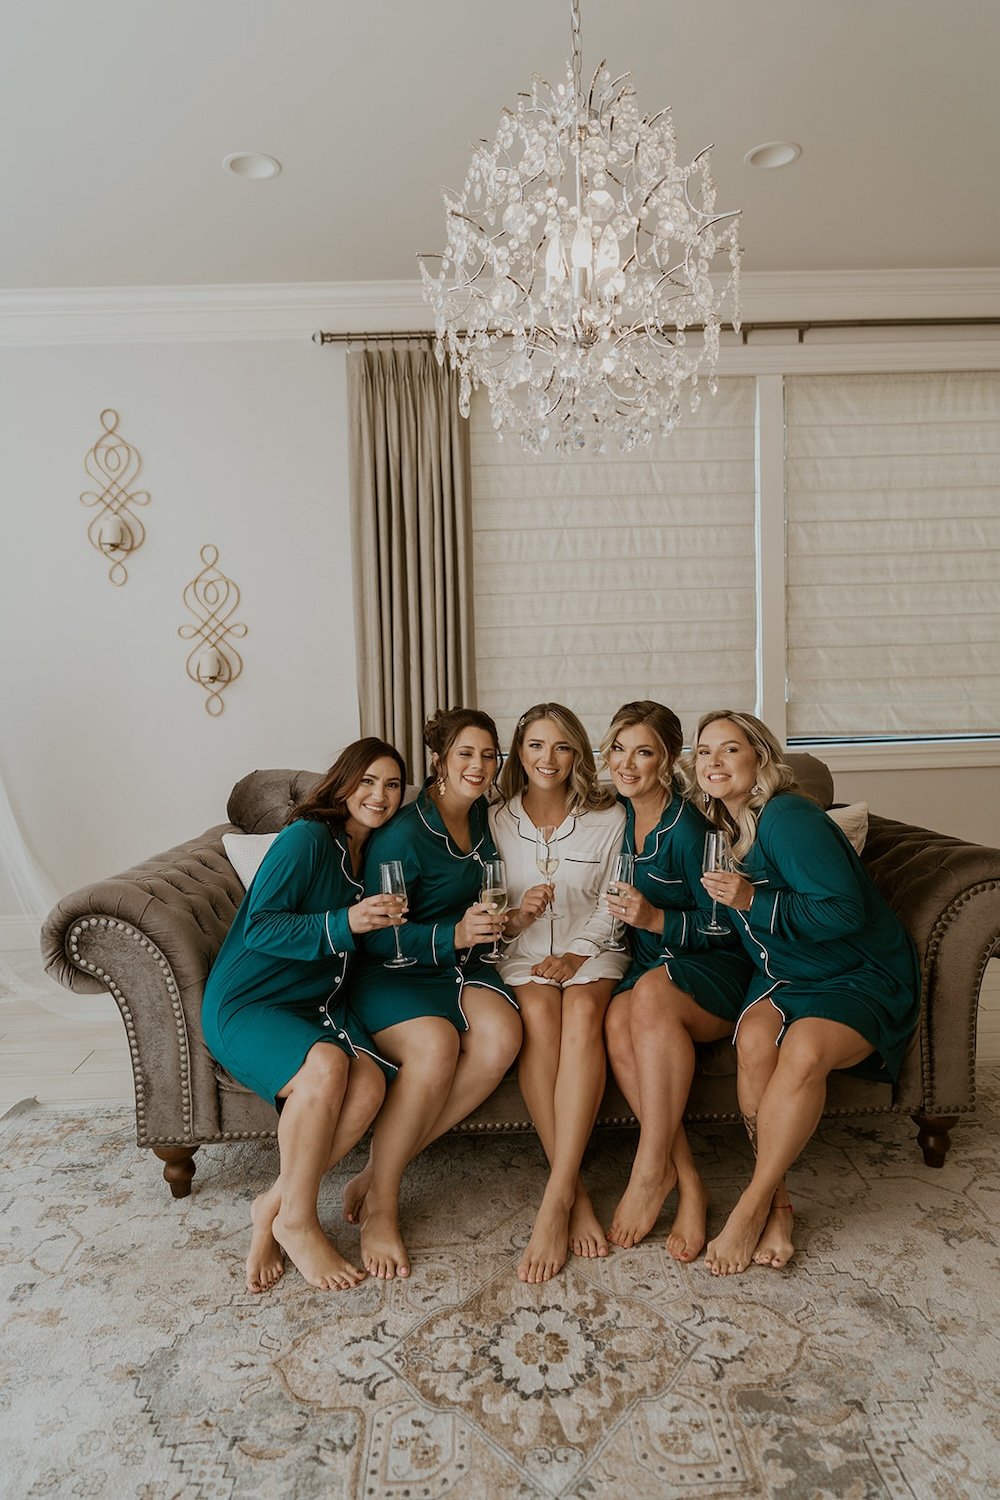 The bridesmaids sit around their bride with champagne.